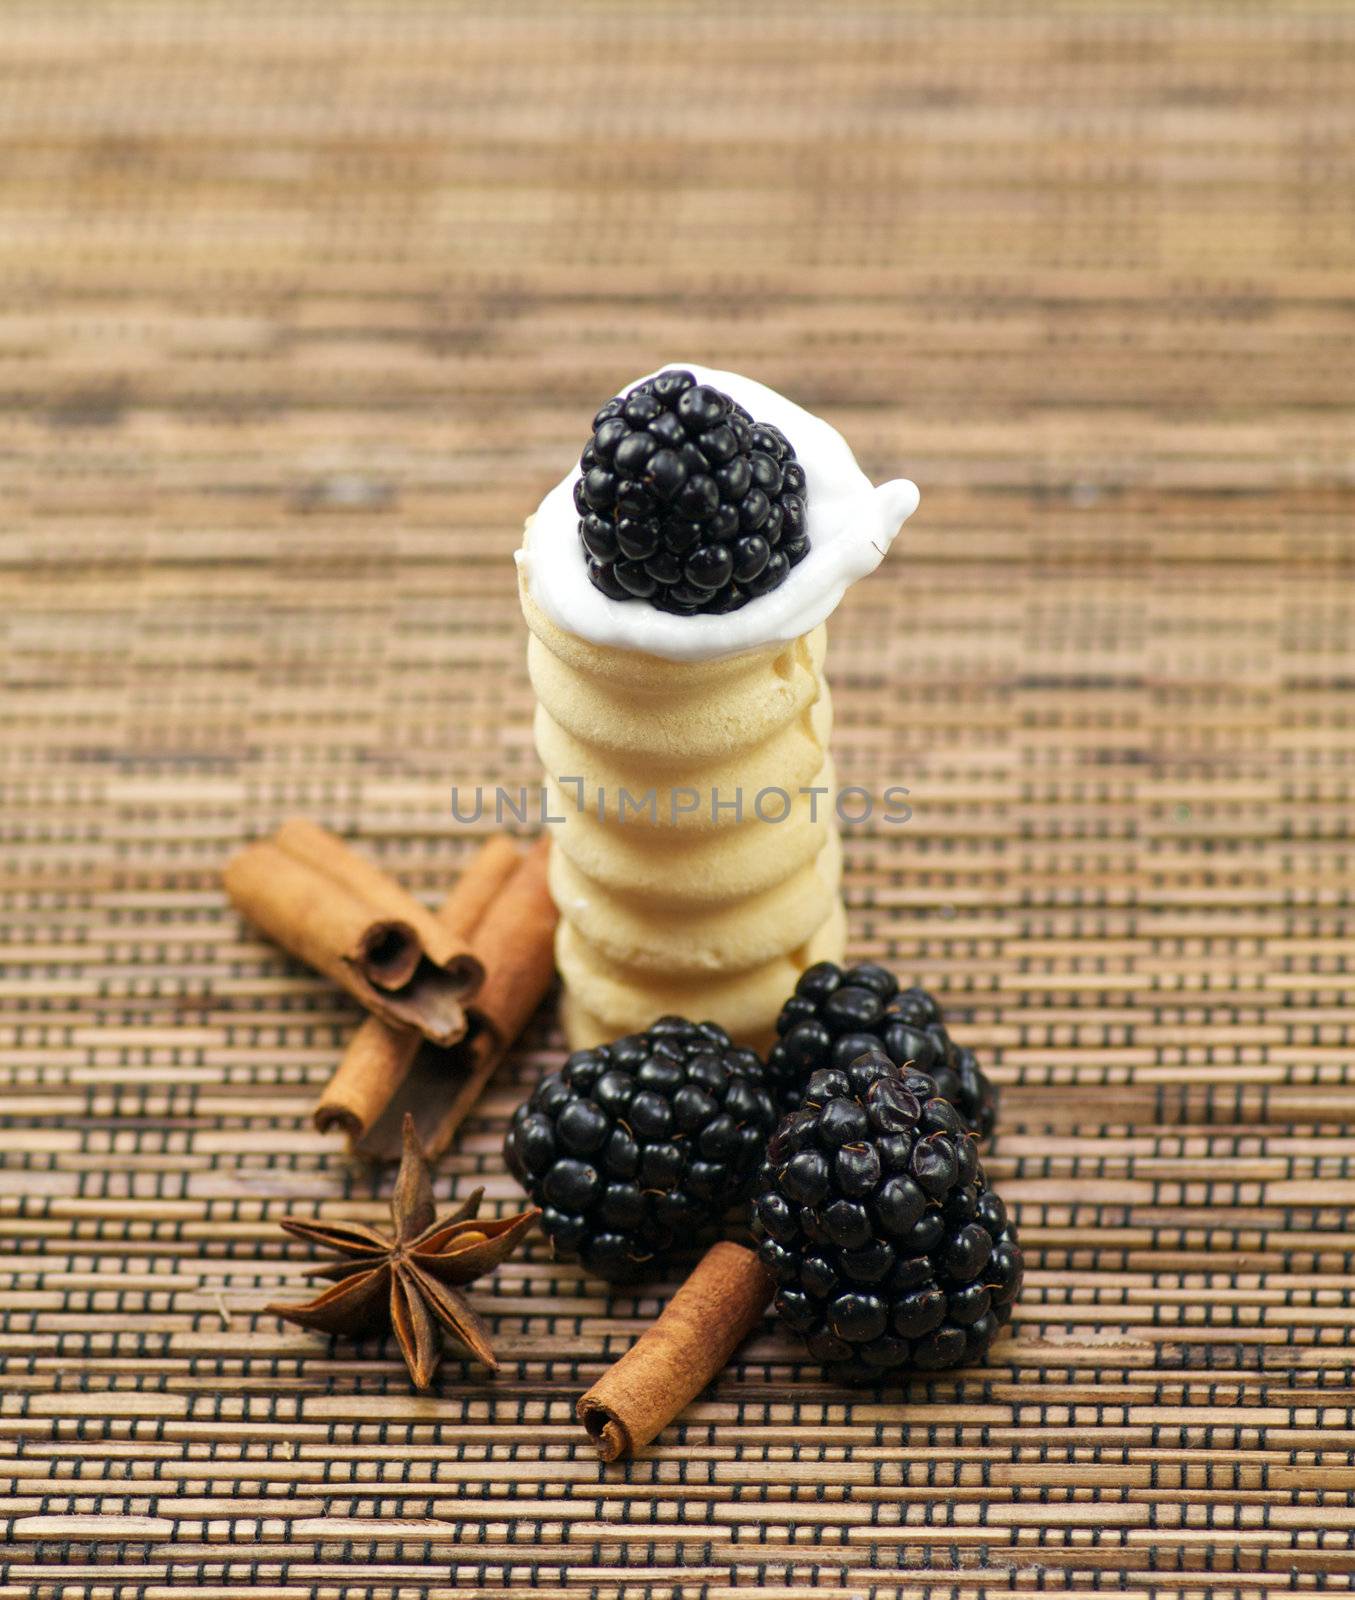 Small baskets from shortcake dough with whipped cream, a blackberry, cinnamon and anise by zhekos